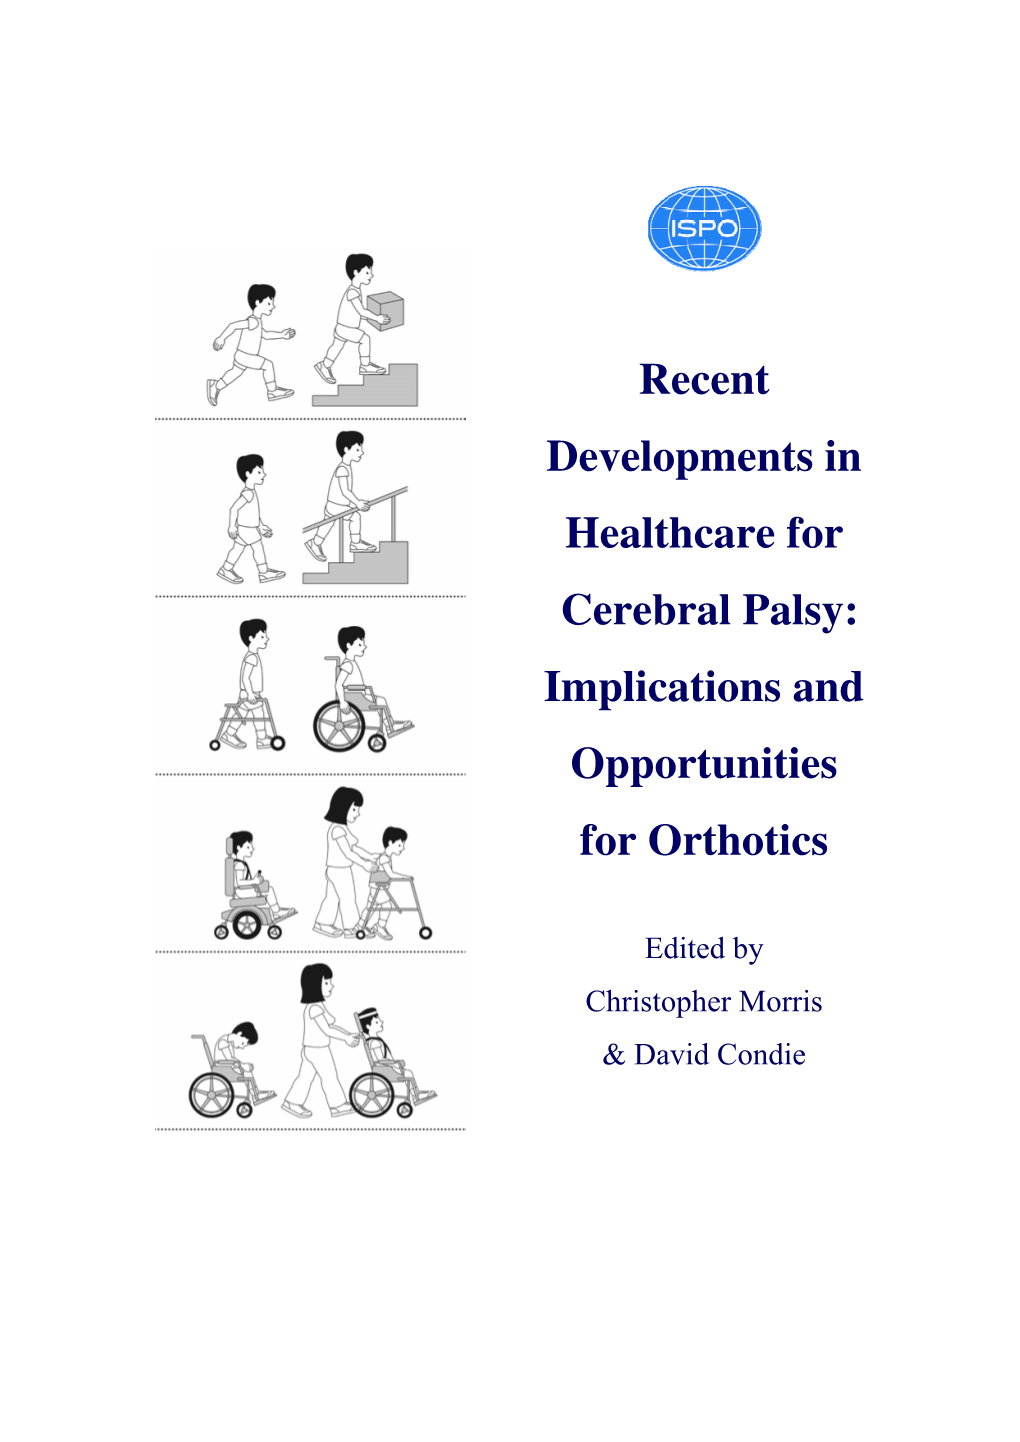 Recent Developments in Healthcare for Cerebral Palsy: Implications and Opportunities for Orthotics